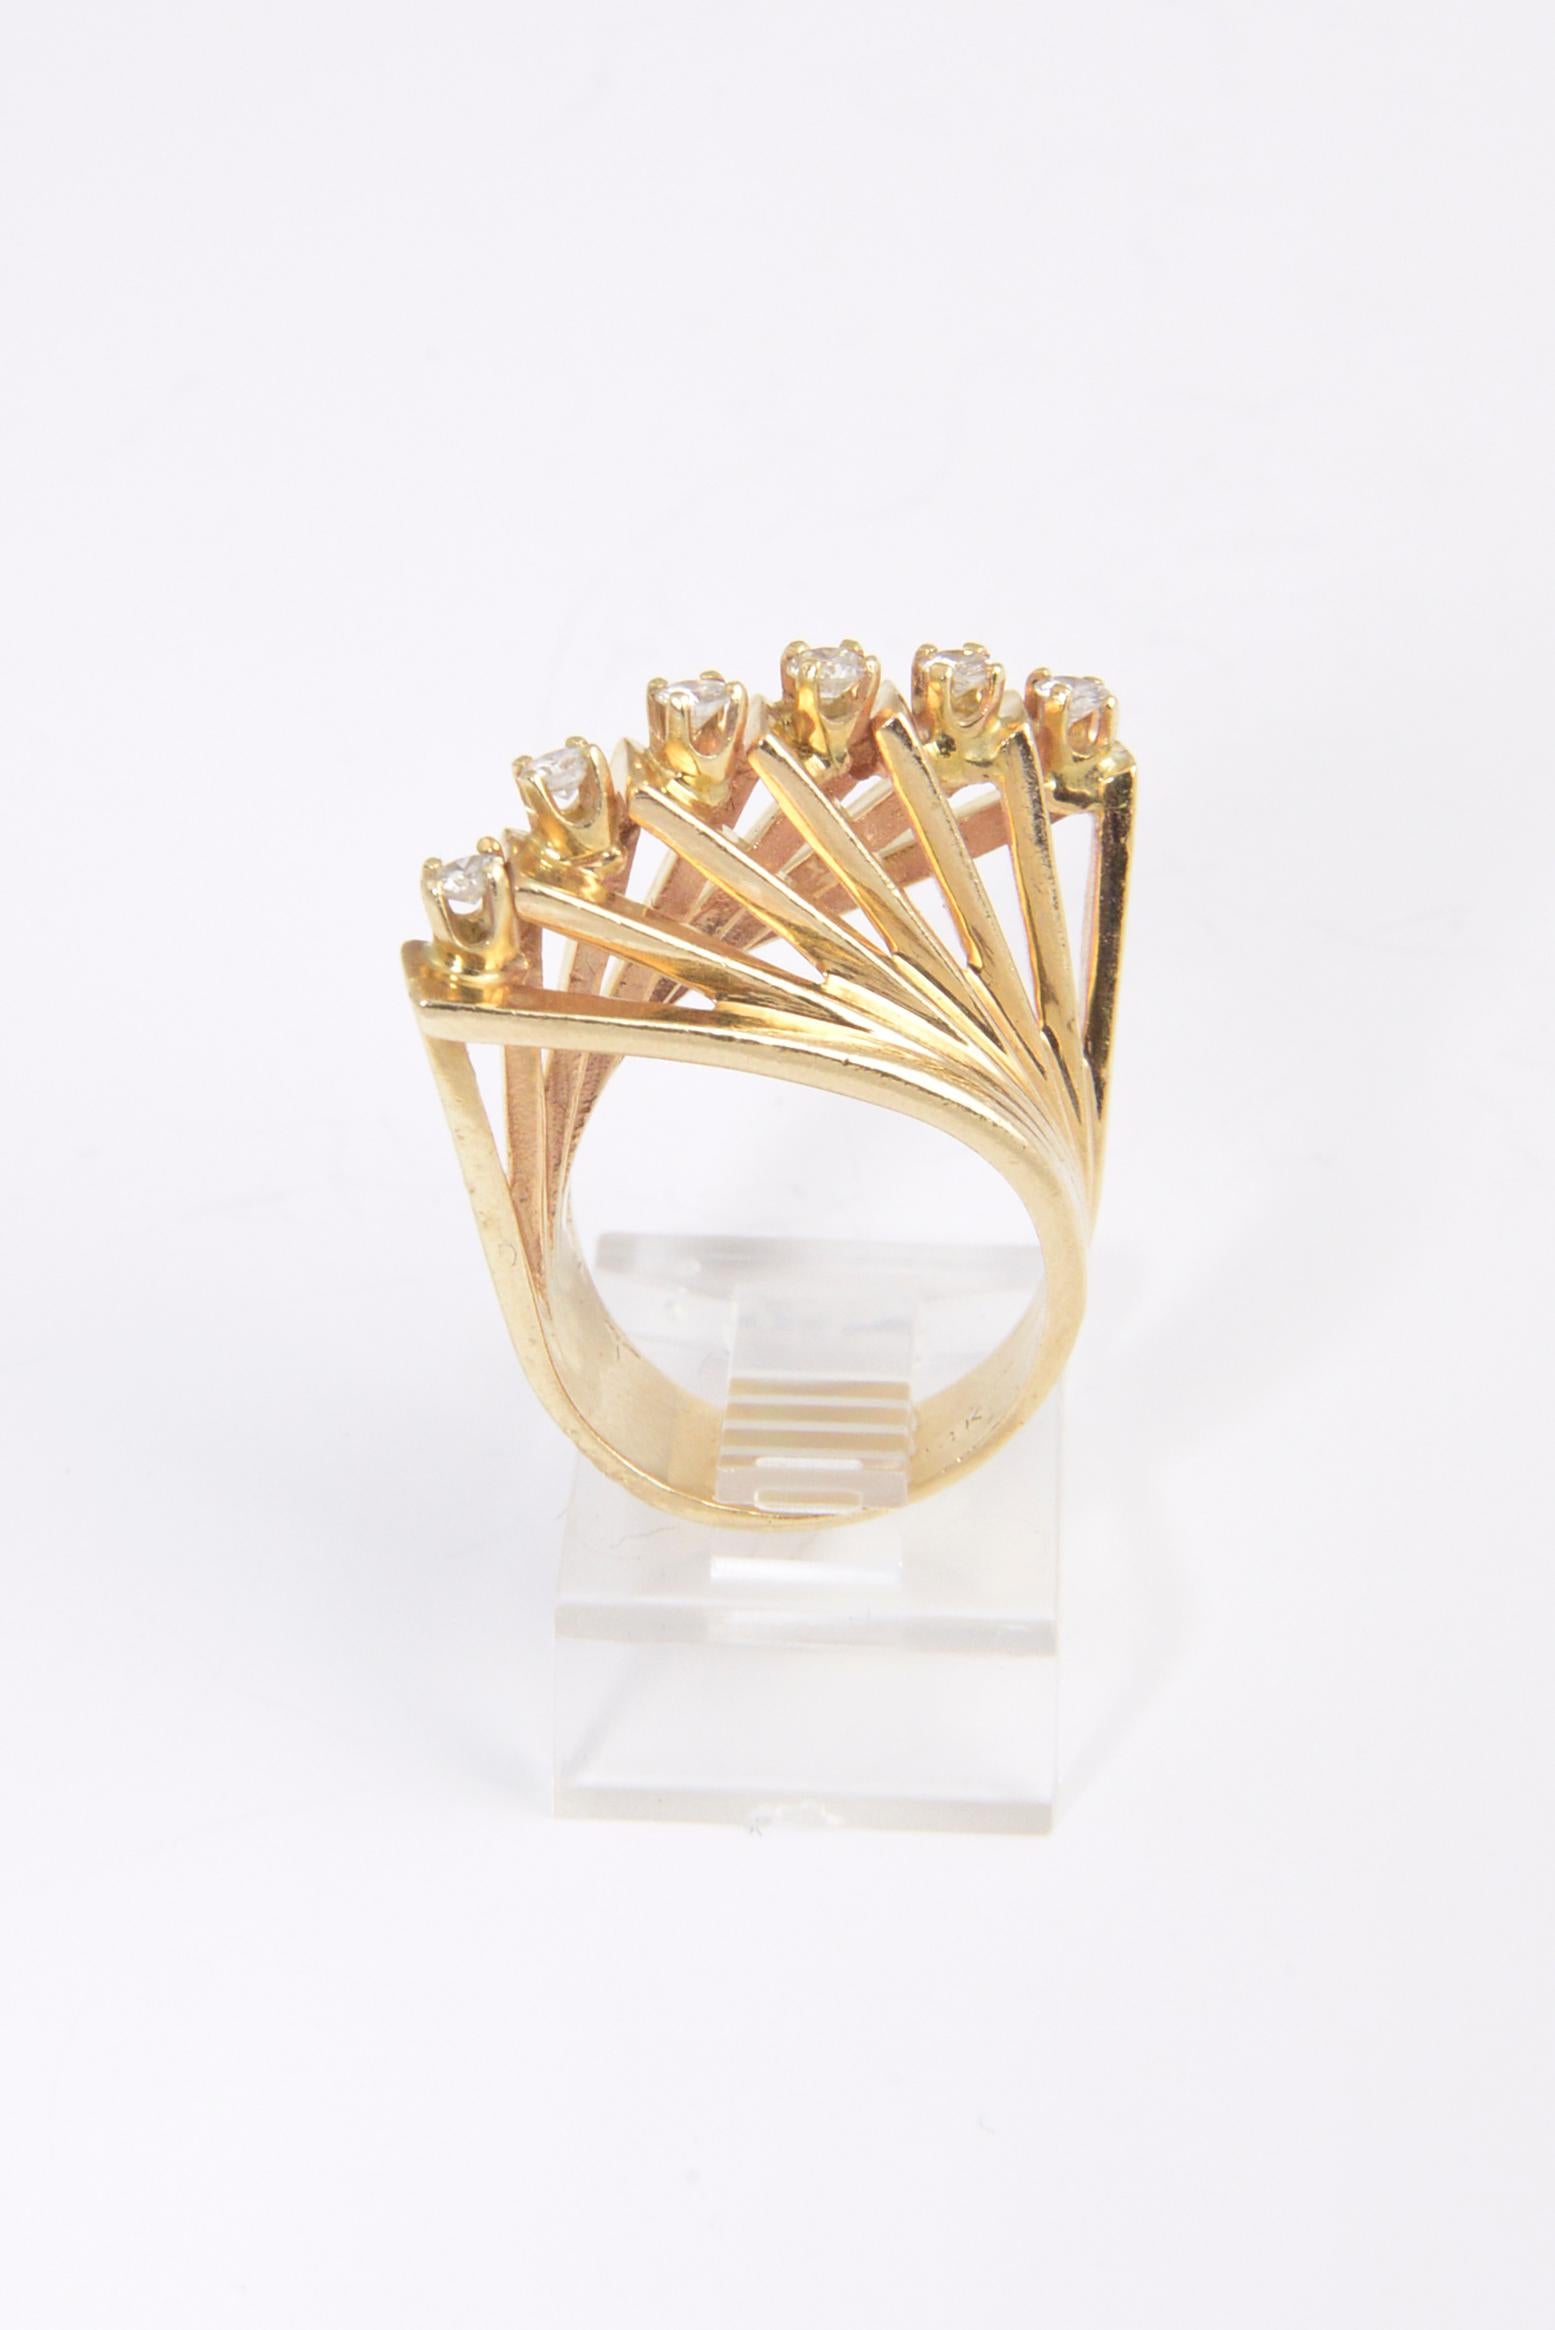 Round Cut 1970s Modernist Geometric Three Dimensional Diamond Yellow Gold Ring For Sale